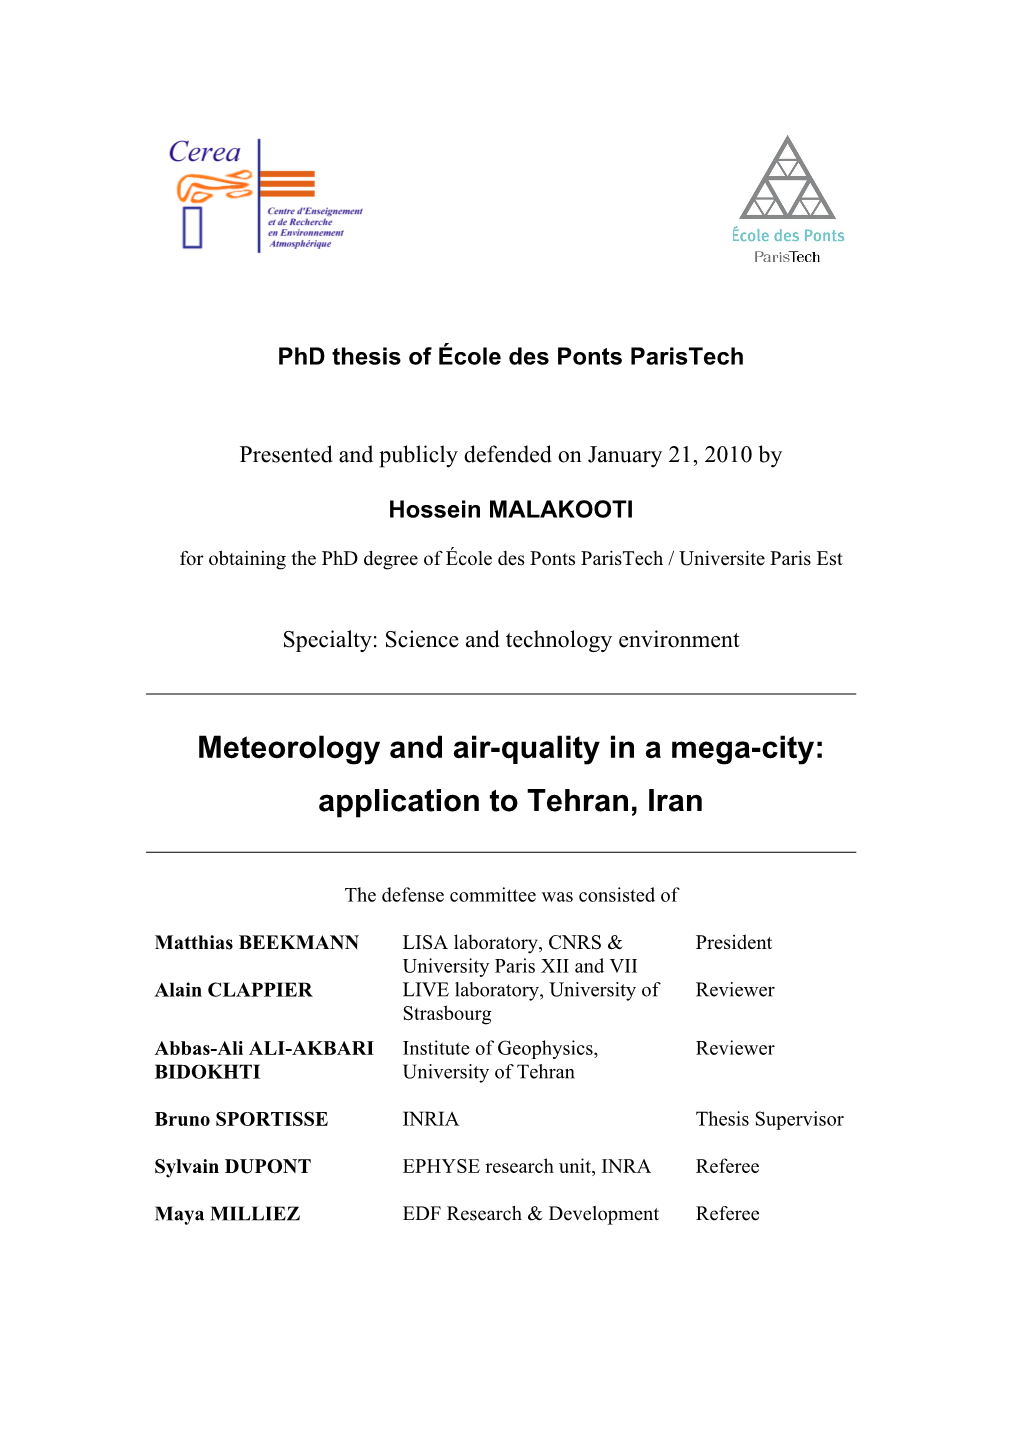 Meteorology and Air-Quality in a Mega-City: Application to Tehran, Iran